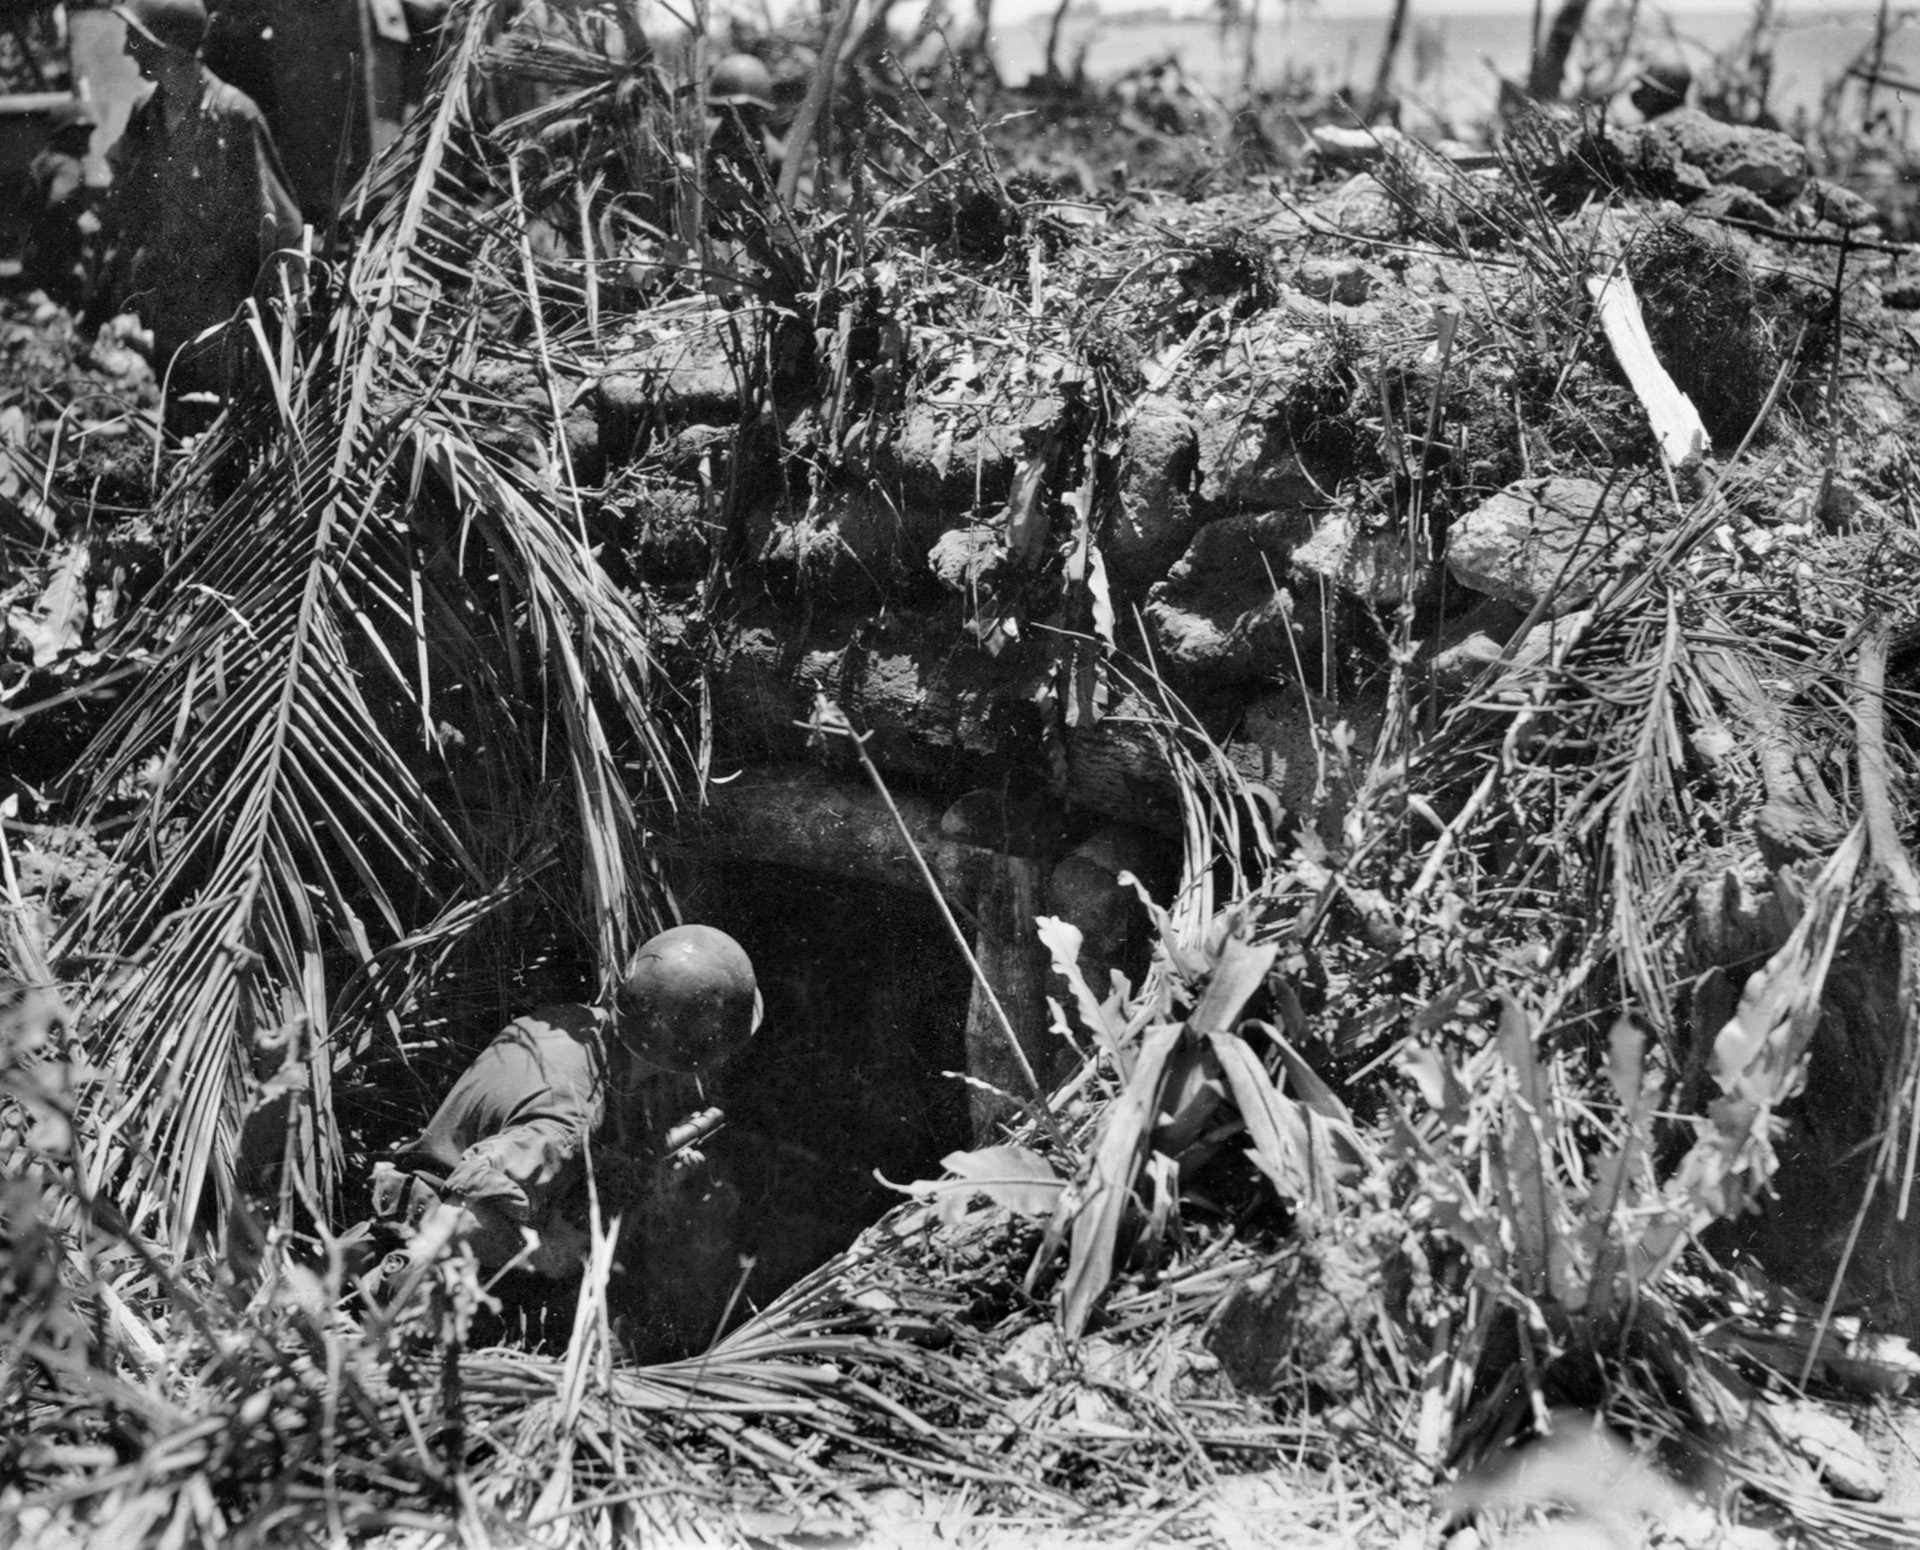 An American soldier, his weapon at the ready, cautiously inspects a well-camouflaged Japanese pillbox.